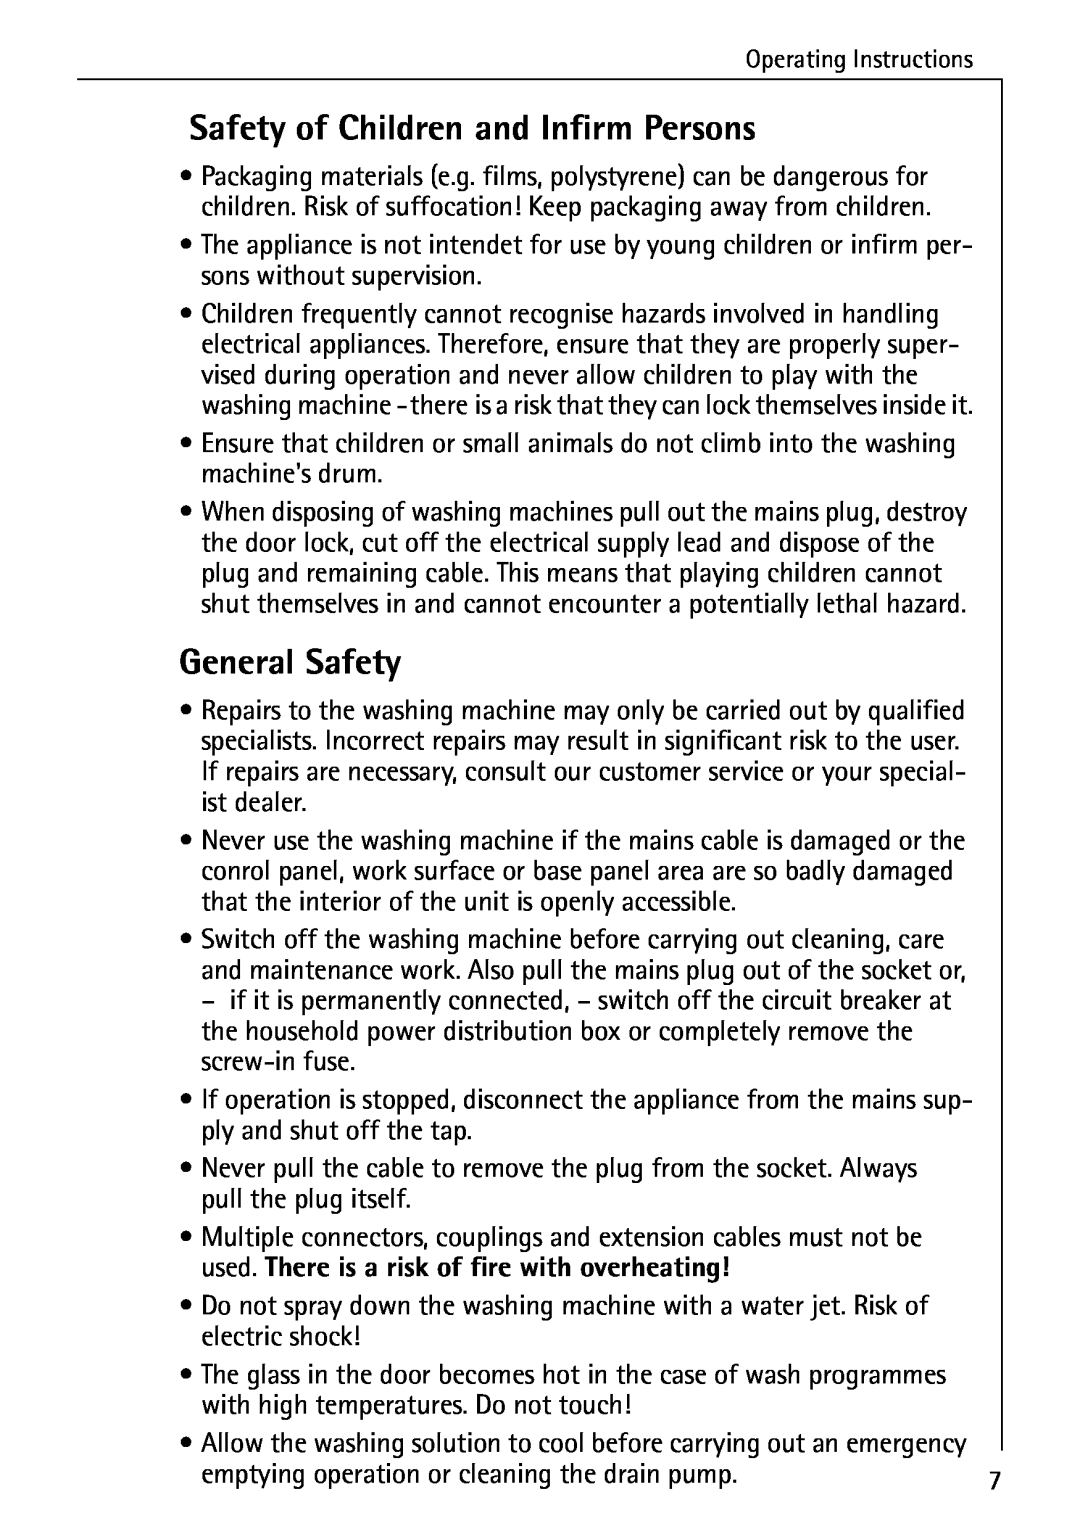 AEG 72640 manual Safety of Children and Infirm Persons, General Safety 